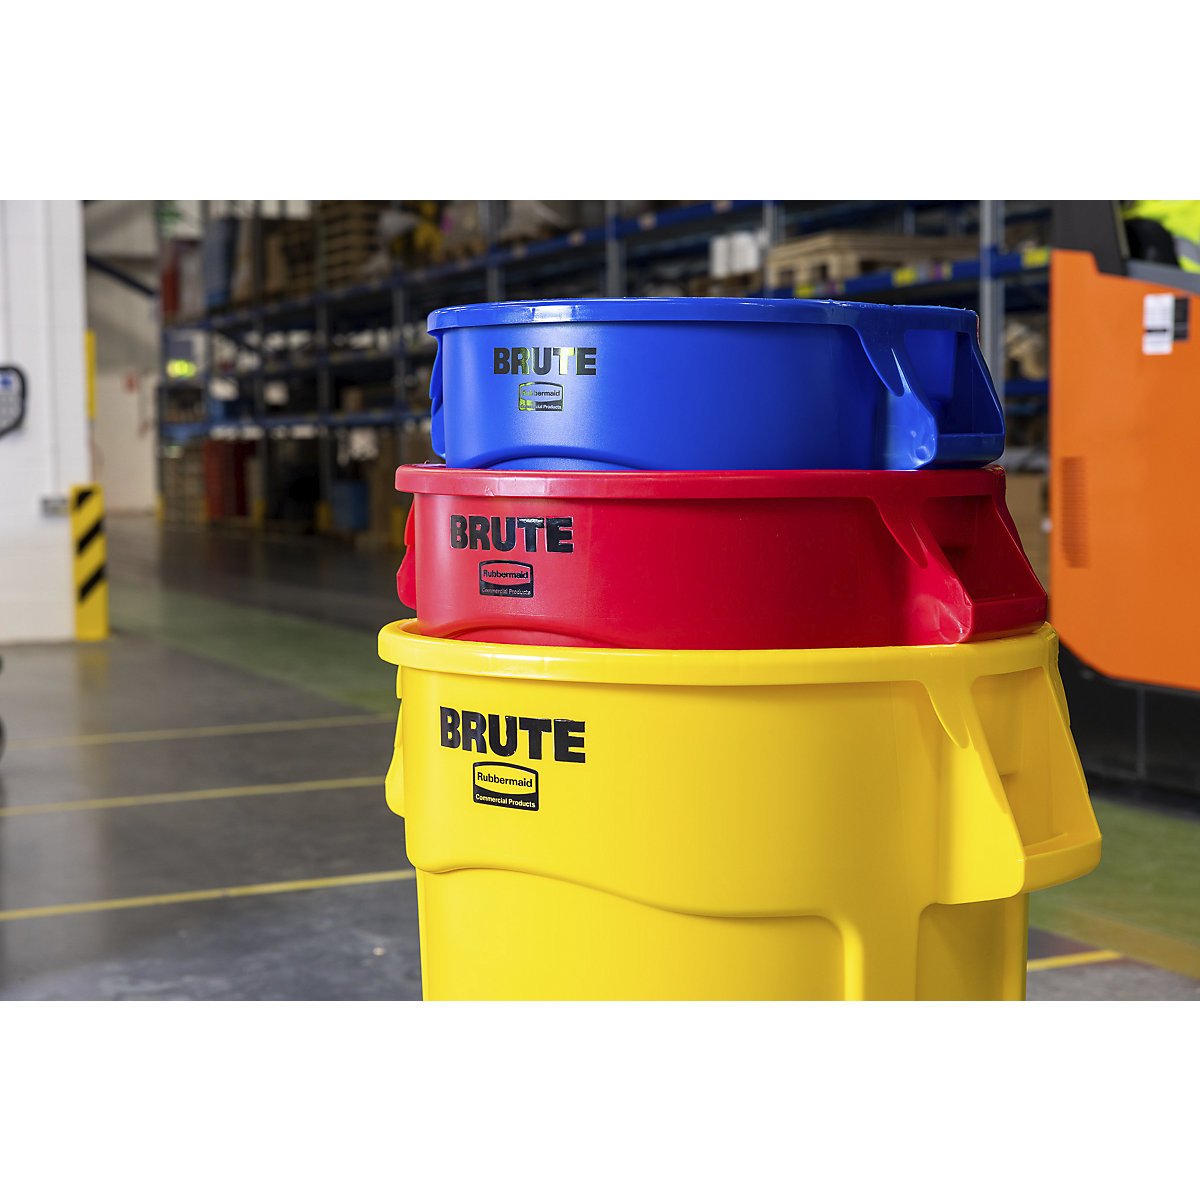 BRUTE® universal container, round – Rubbermaid (Product illustration 4)-3